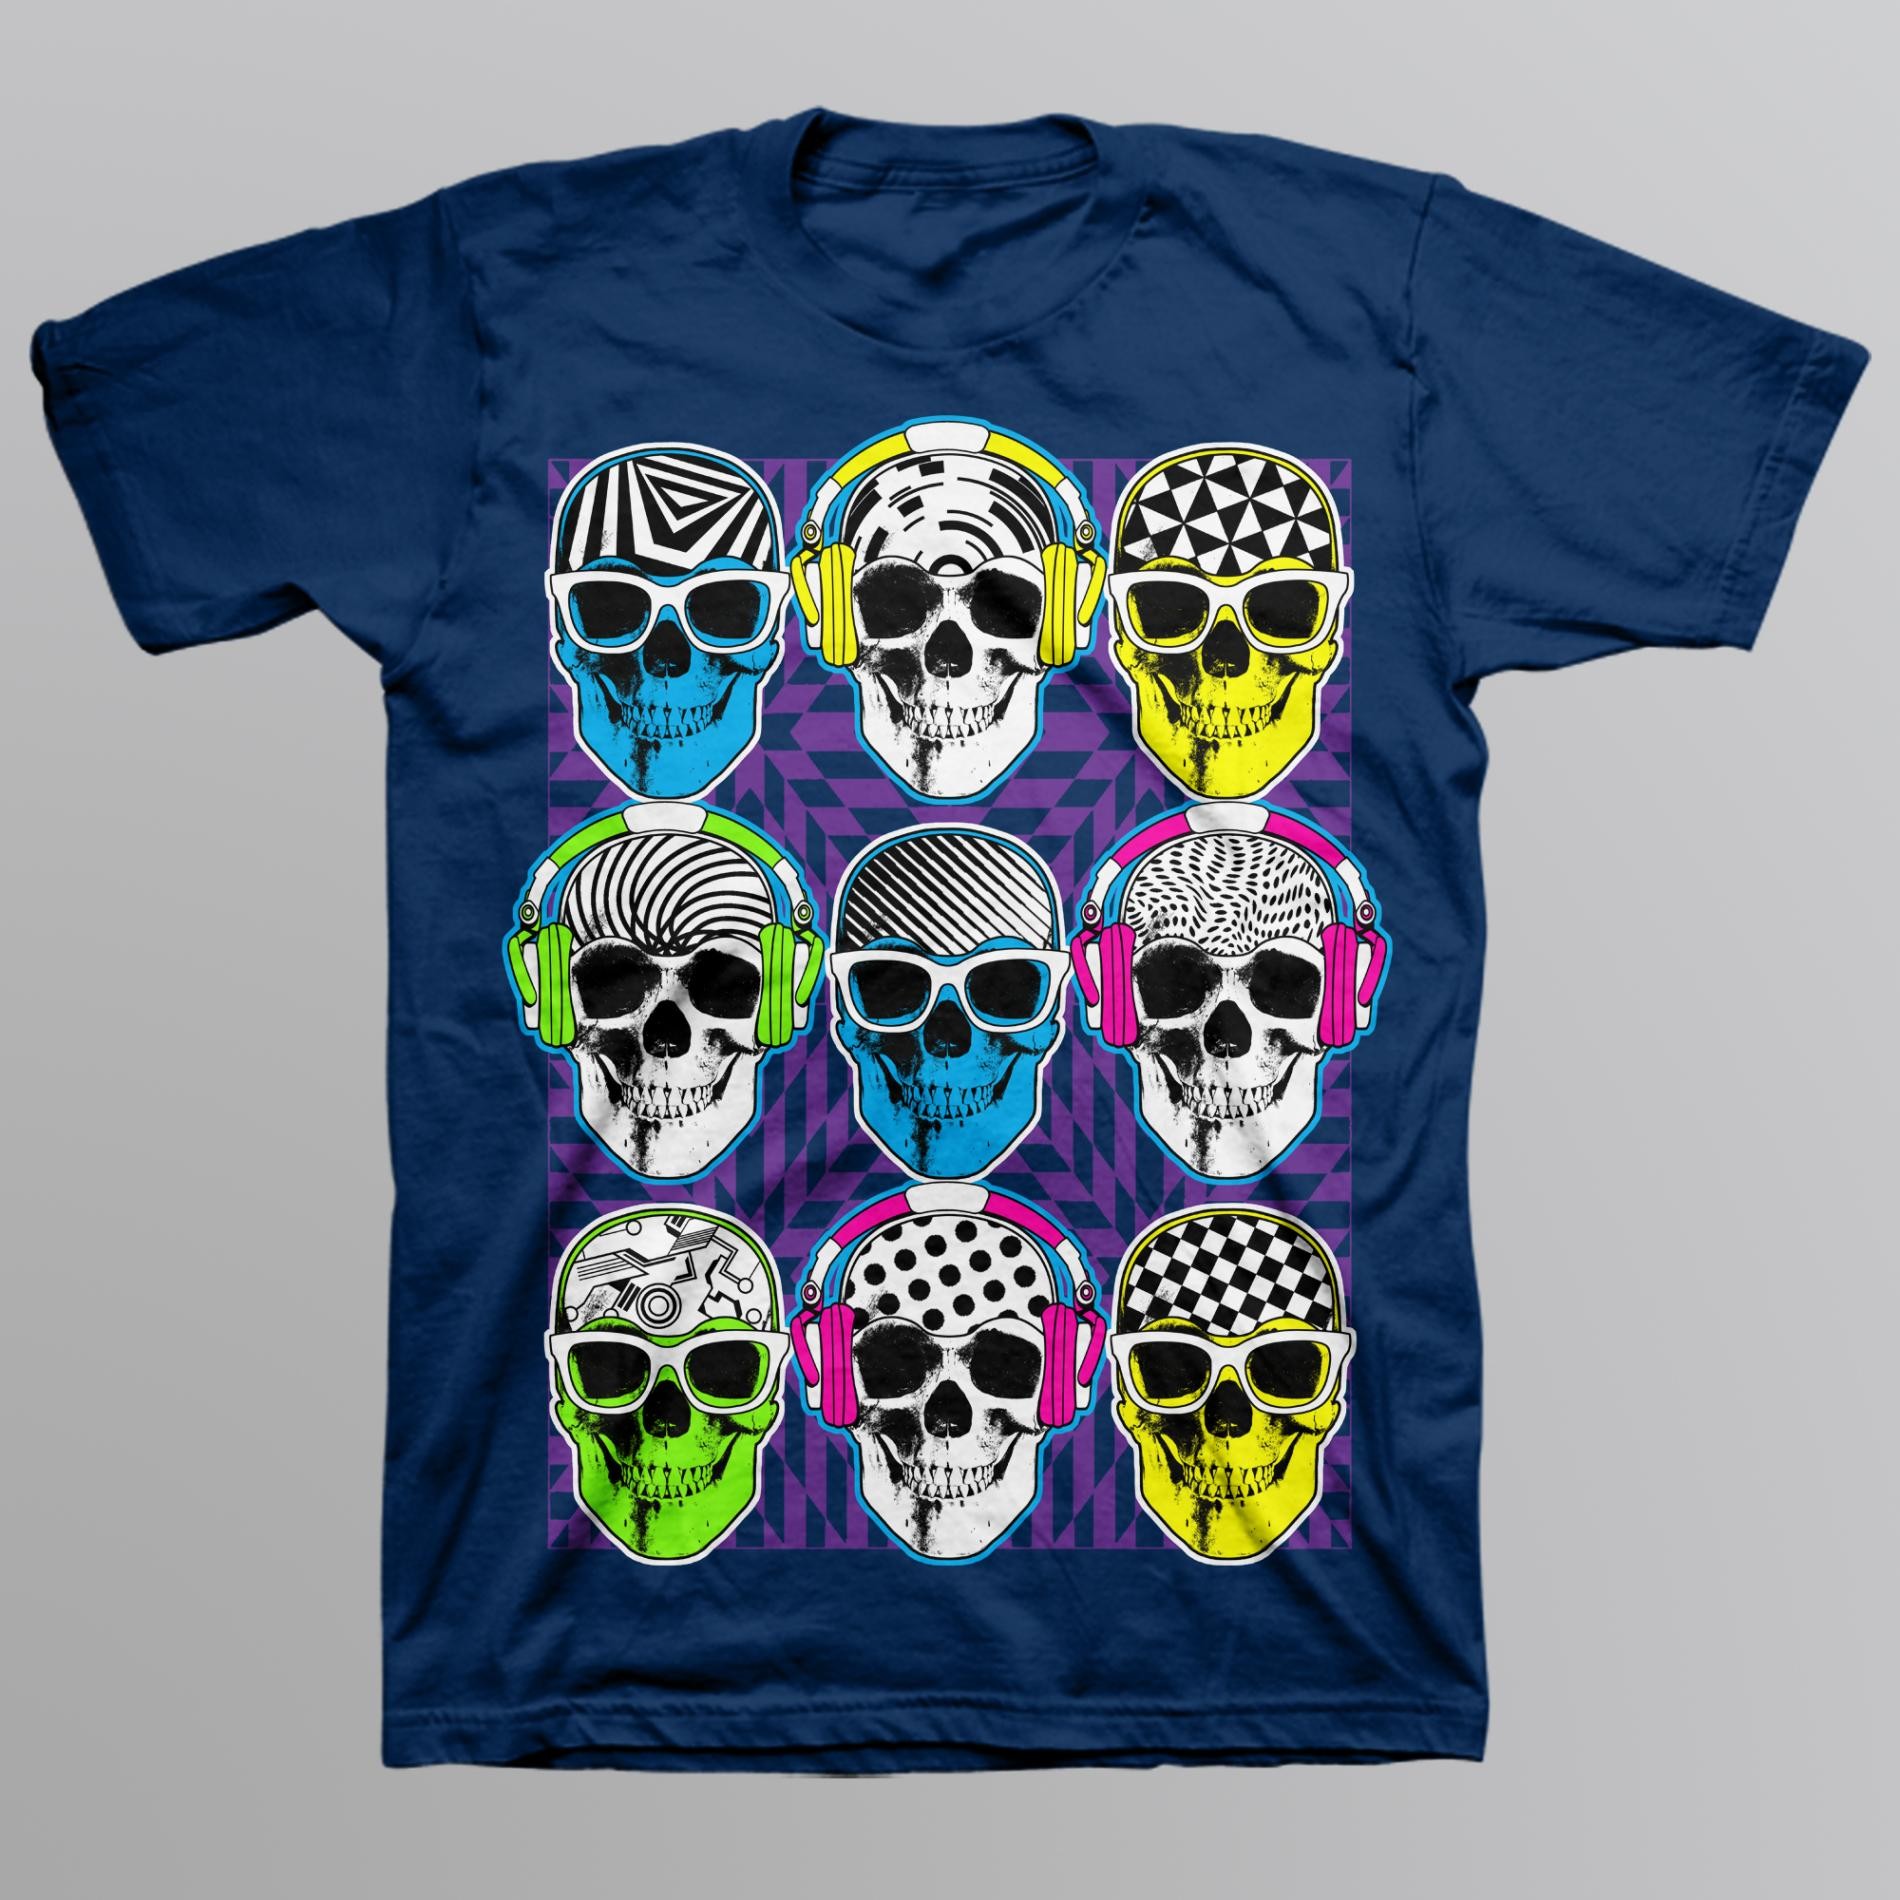 Route 66 Boy's Graphic T-Shirt - Psychedelic Skull Heads